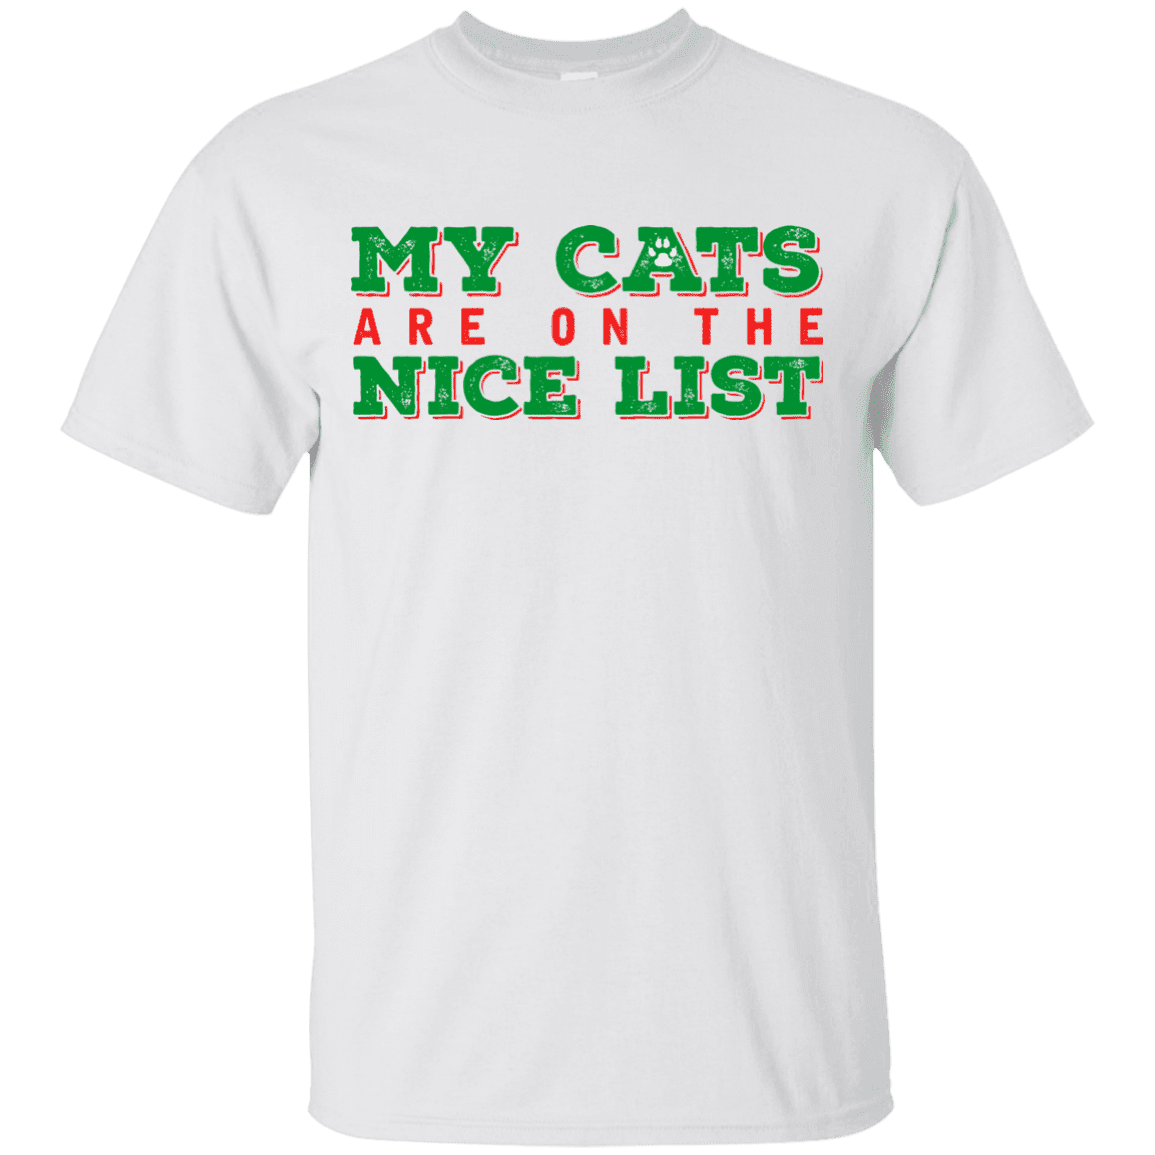 My Cats Are On The Nice List - White T-Shirt.